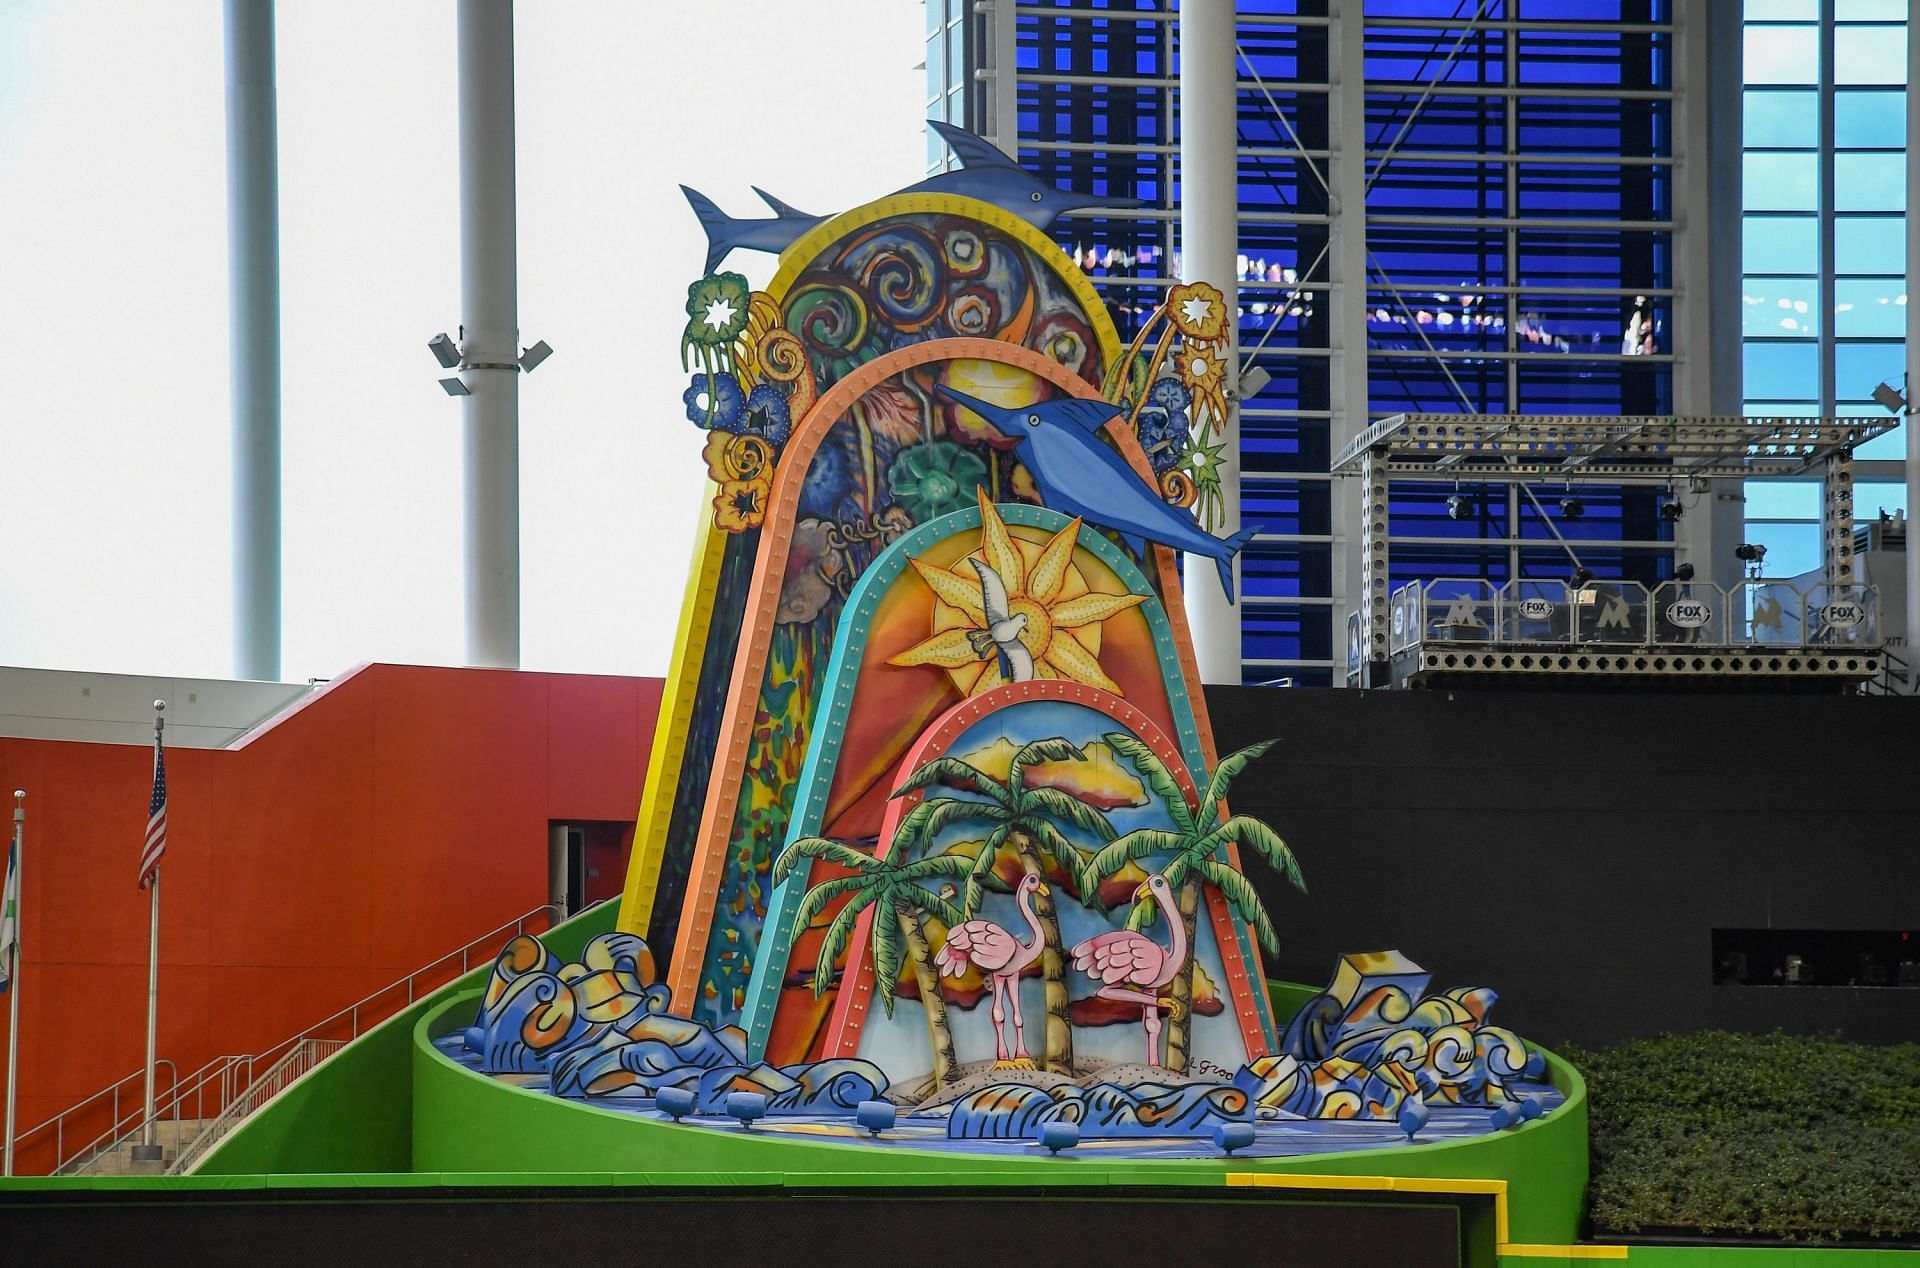 A detailed view of the Marlins home run sculpture in centerfield before Opening Day between the Miami Marlins and the Chicago Cubs at Marlins Park on March 29, 2018 in Miami, Florida. (Photo by Mark Brown/Getty Images)